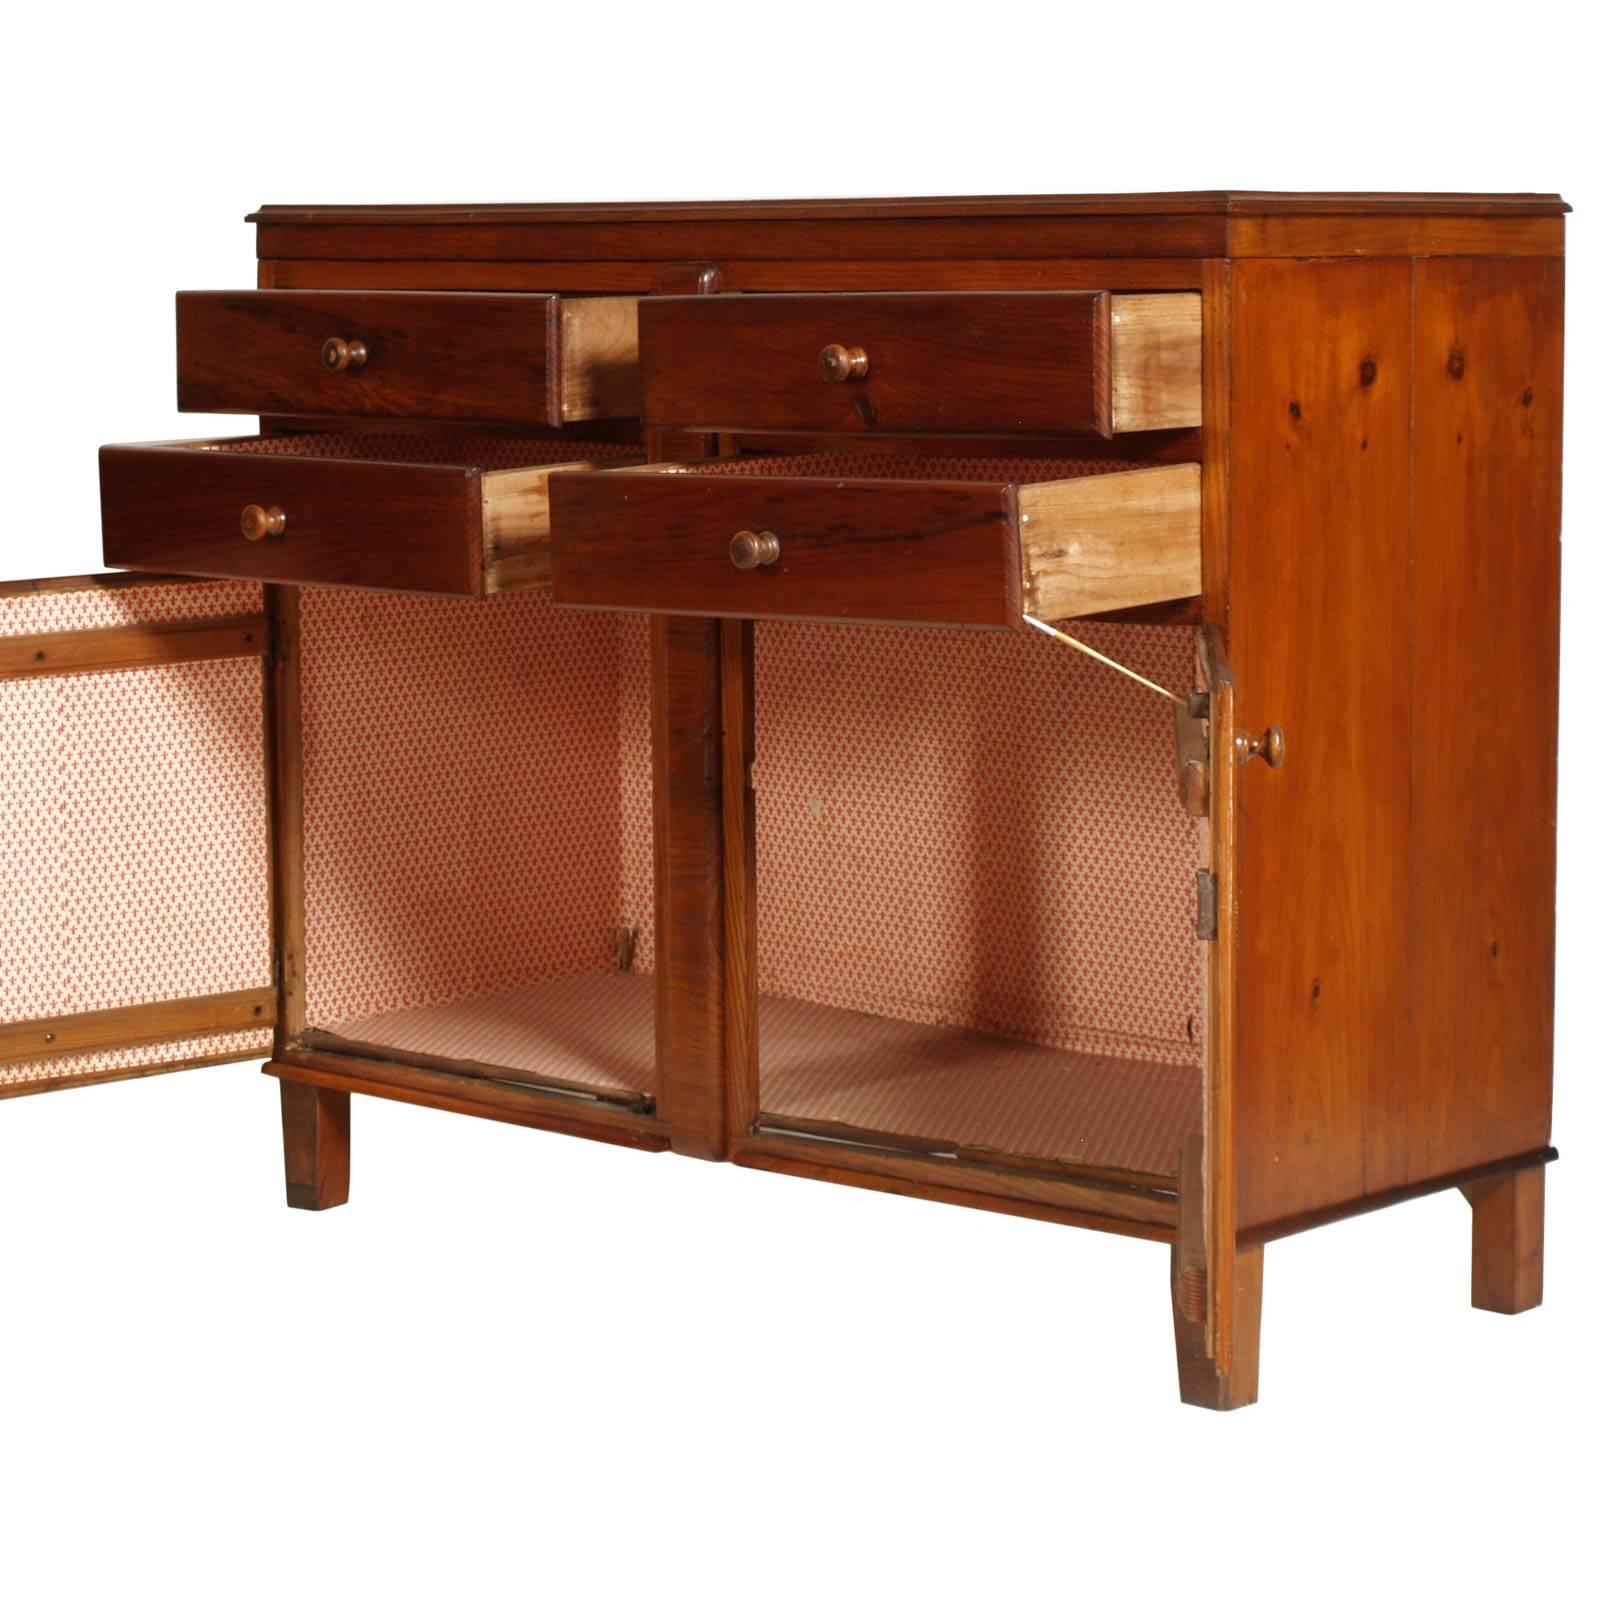 Country Late 19th Century Italy Credenza Sideboard, Solid Walnut , Wax Polished For Sale